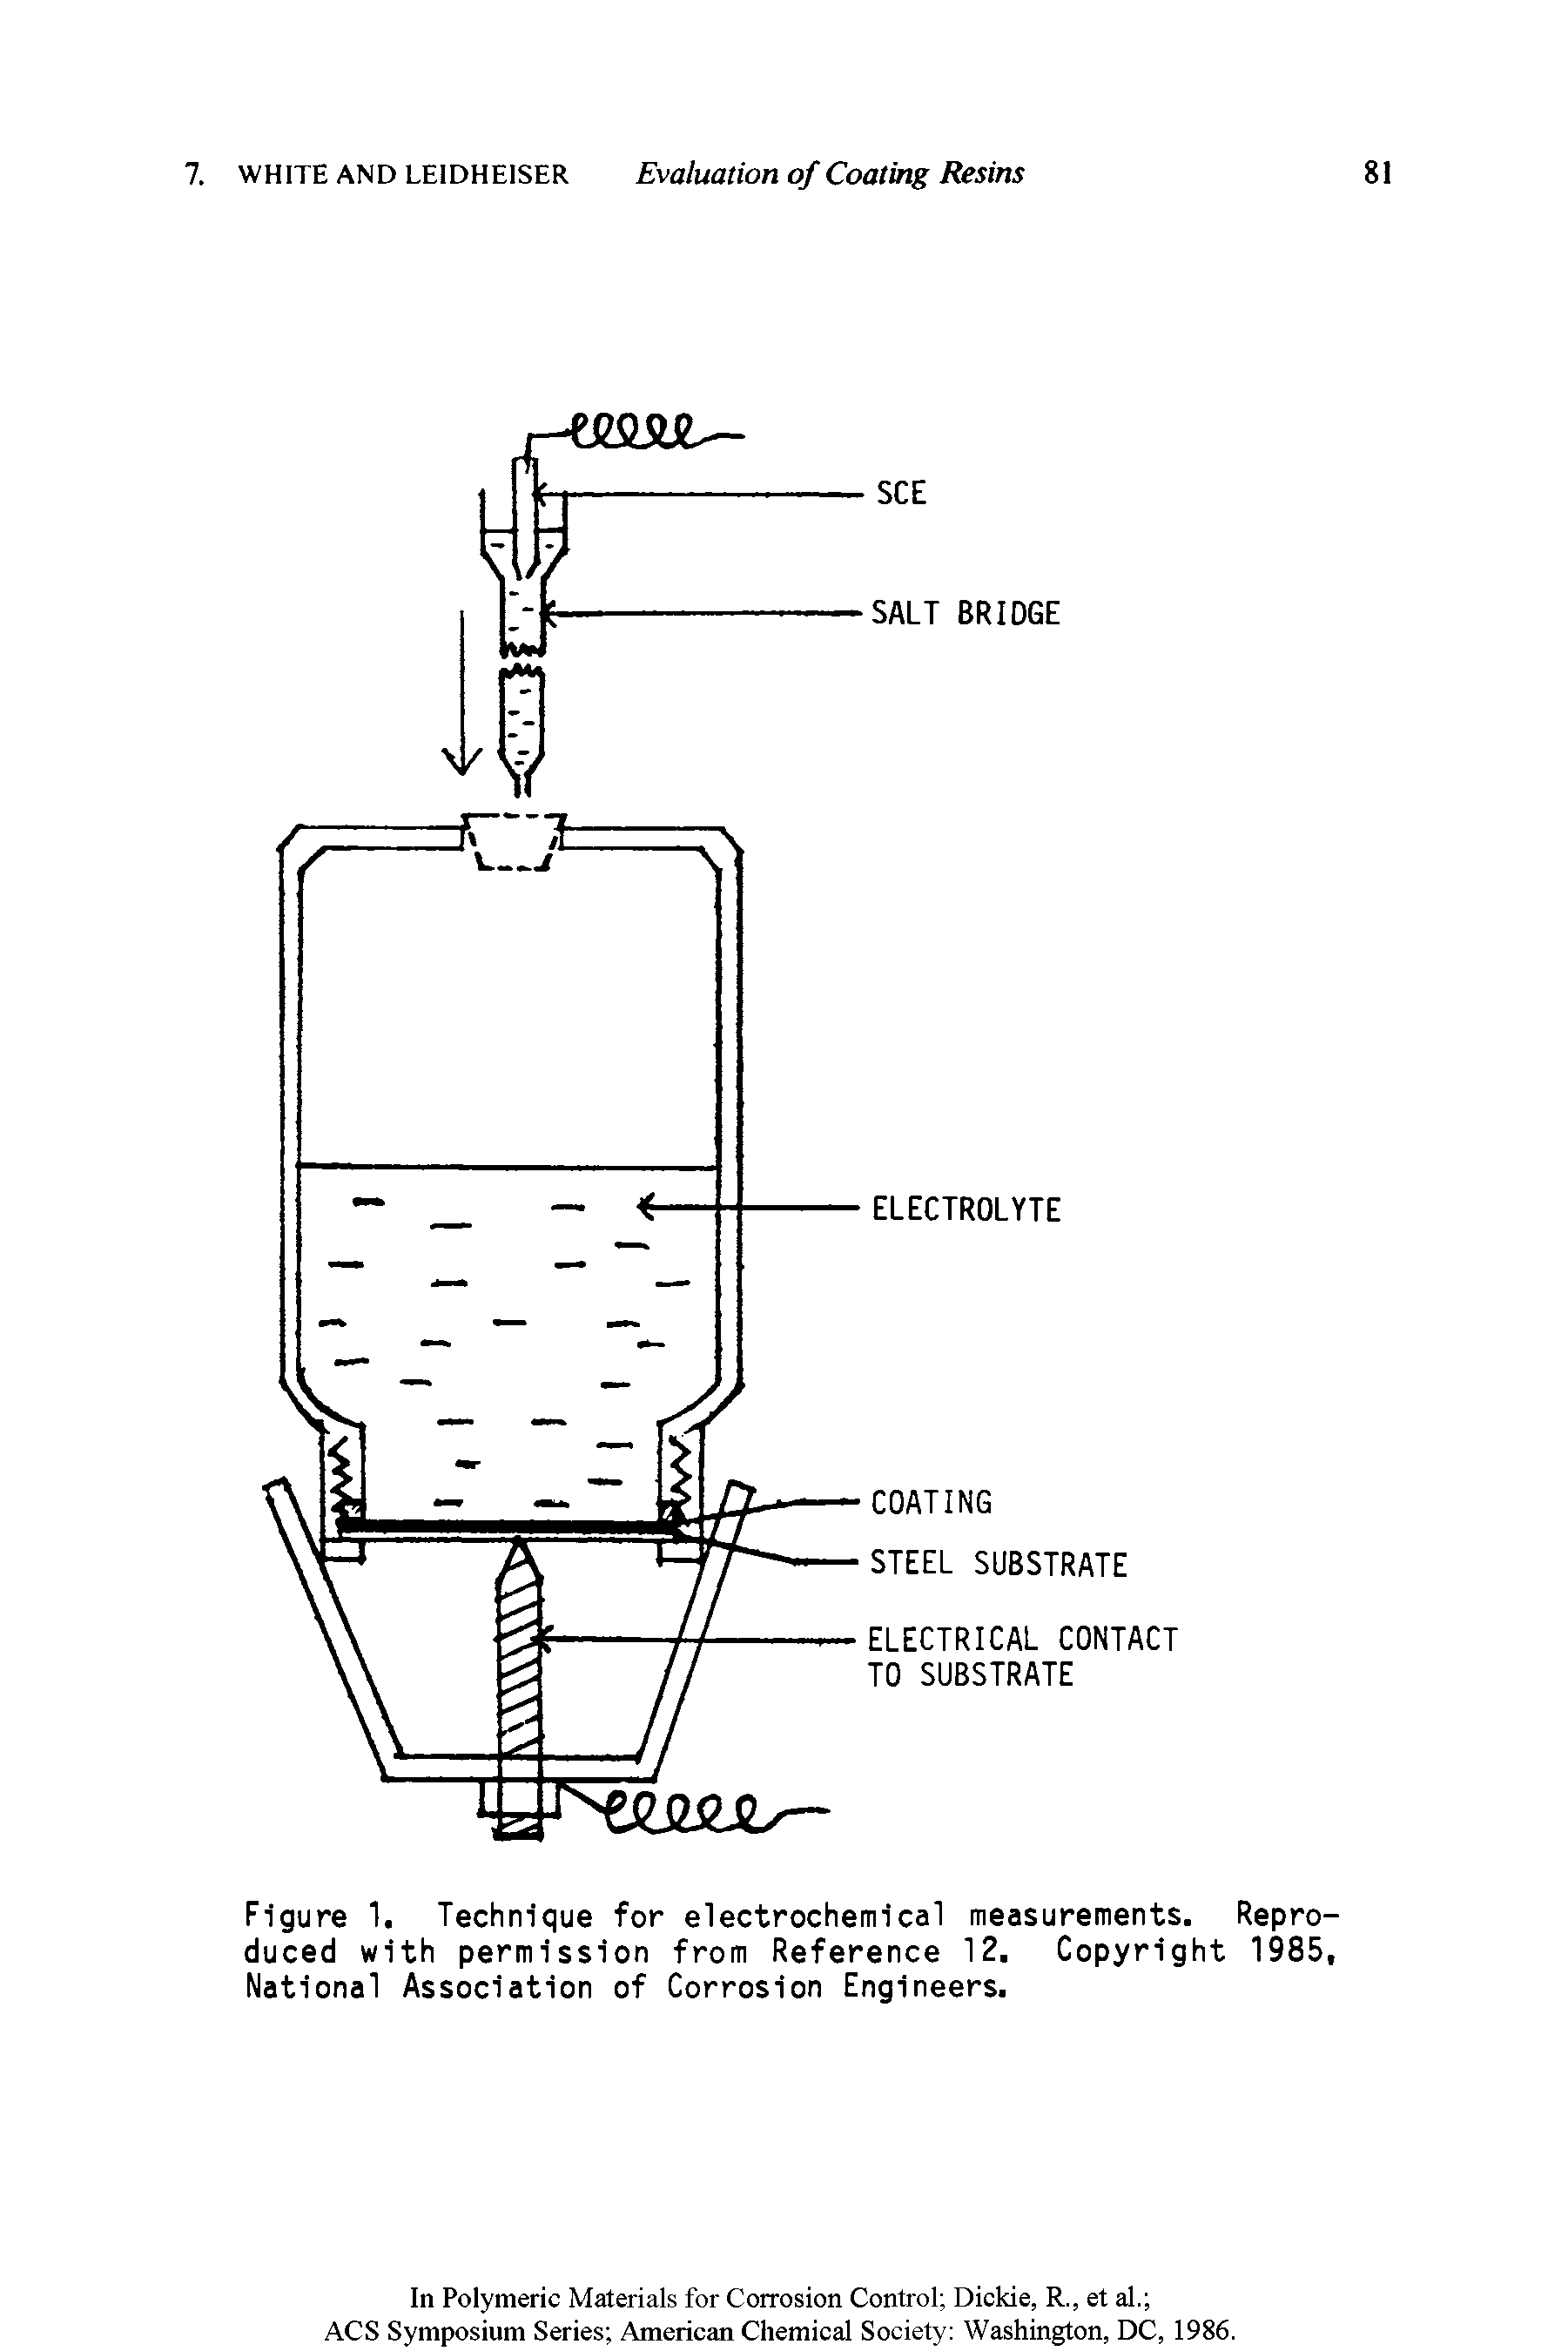 Figure 1. Technique for electrochemical measurements. Reproduced with permission from Reference 12. Copyright 1985, National Association of Corrosion Engineers.